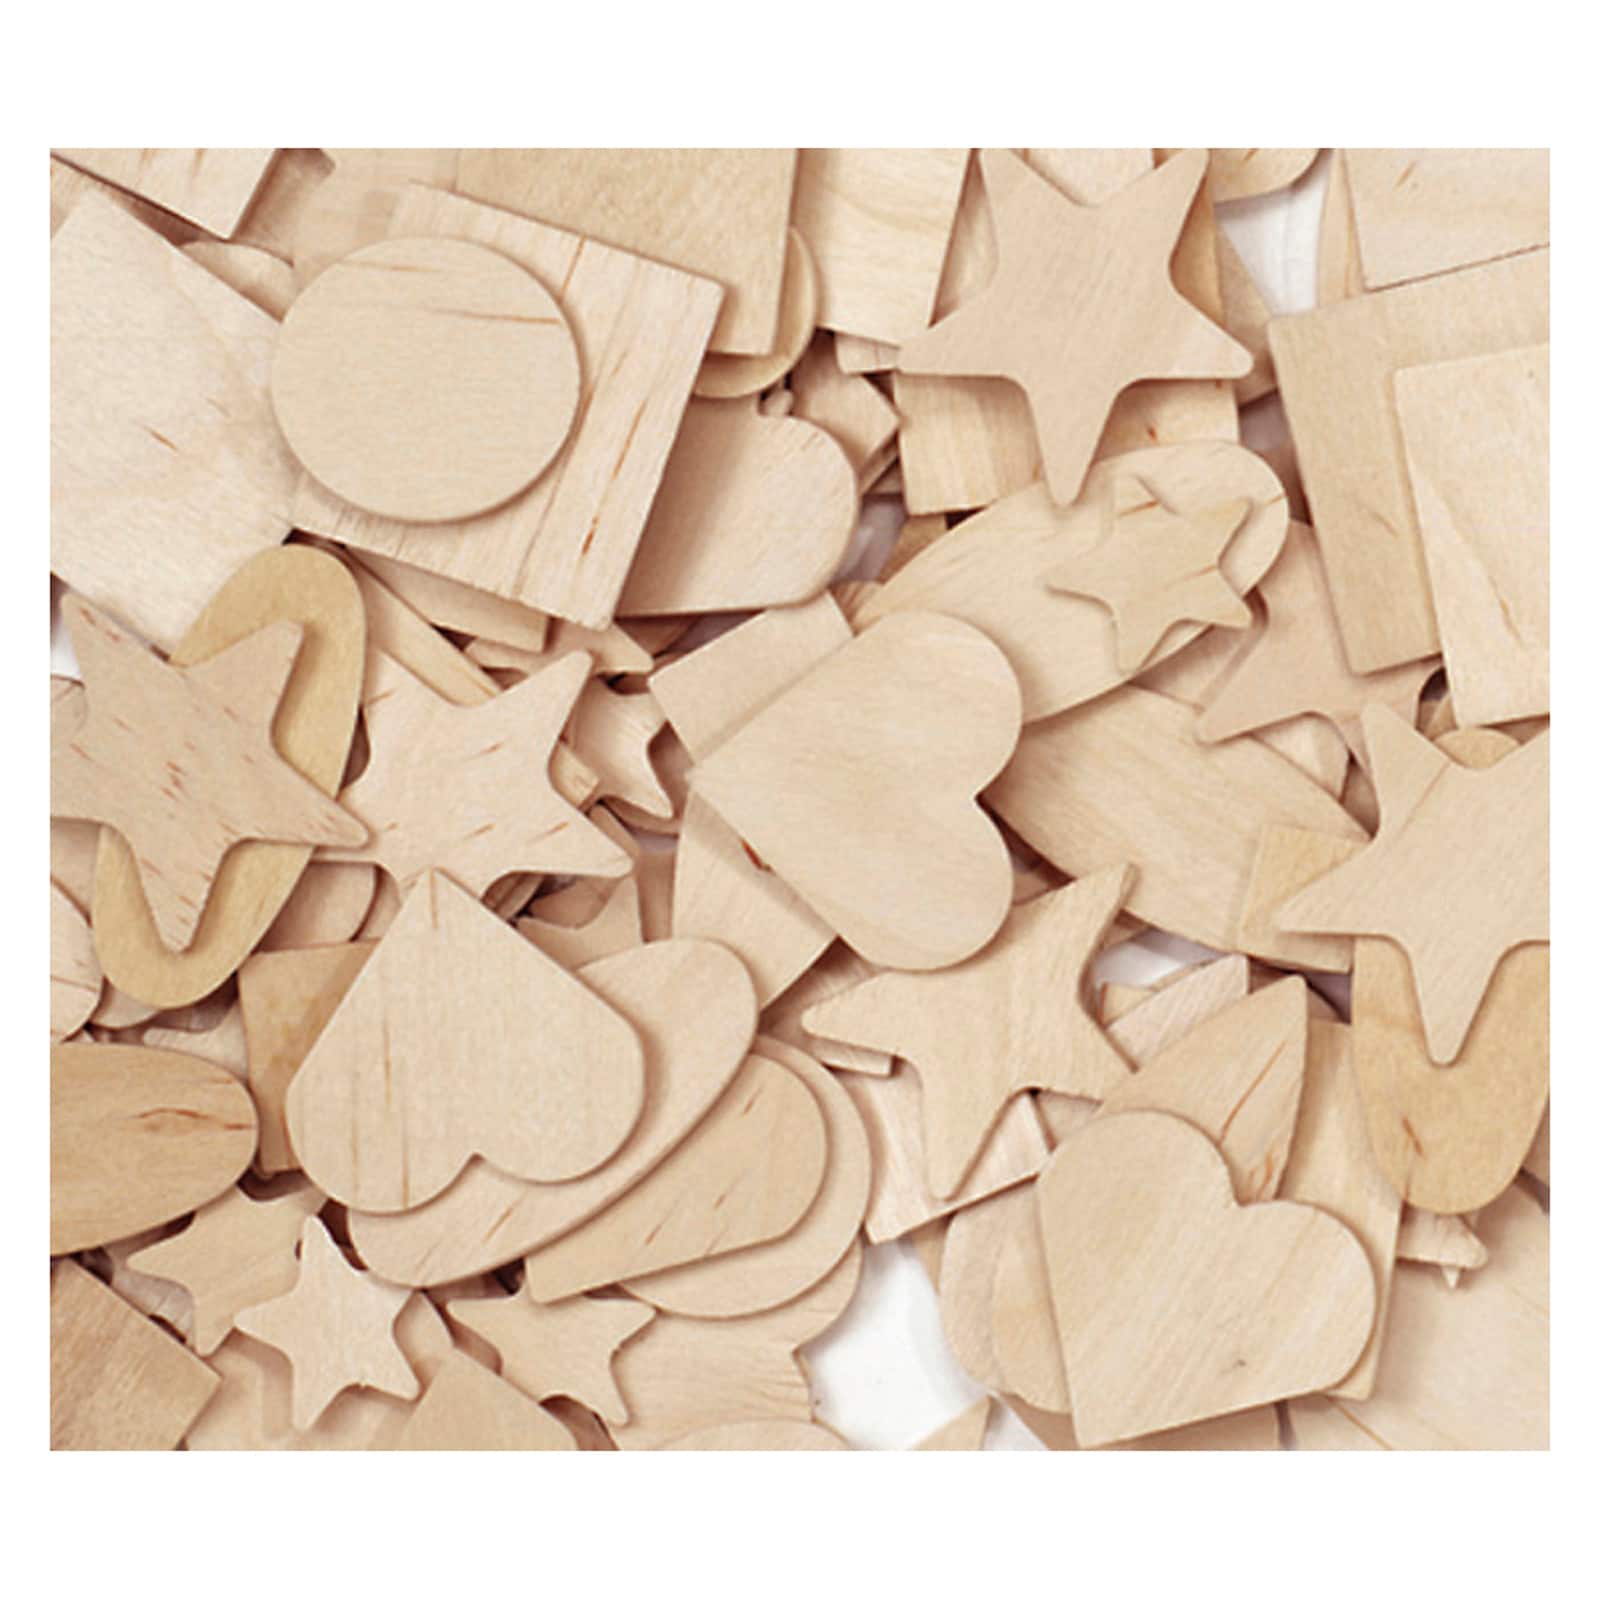 6 Packs: 1,000 ct. (6,000 total) Creativity Street&#xAE; Wooden Shapes